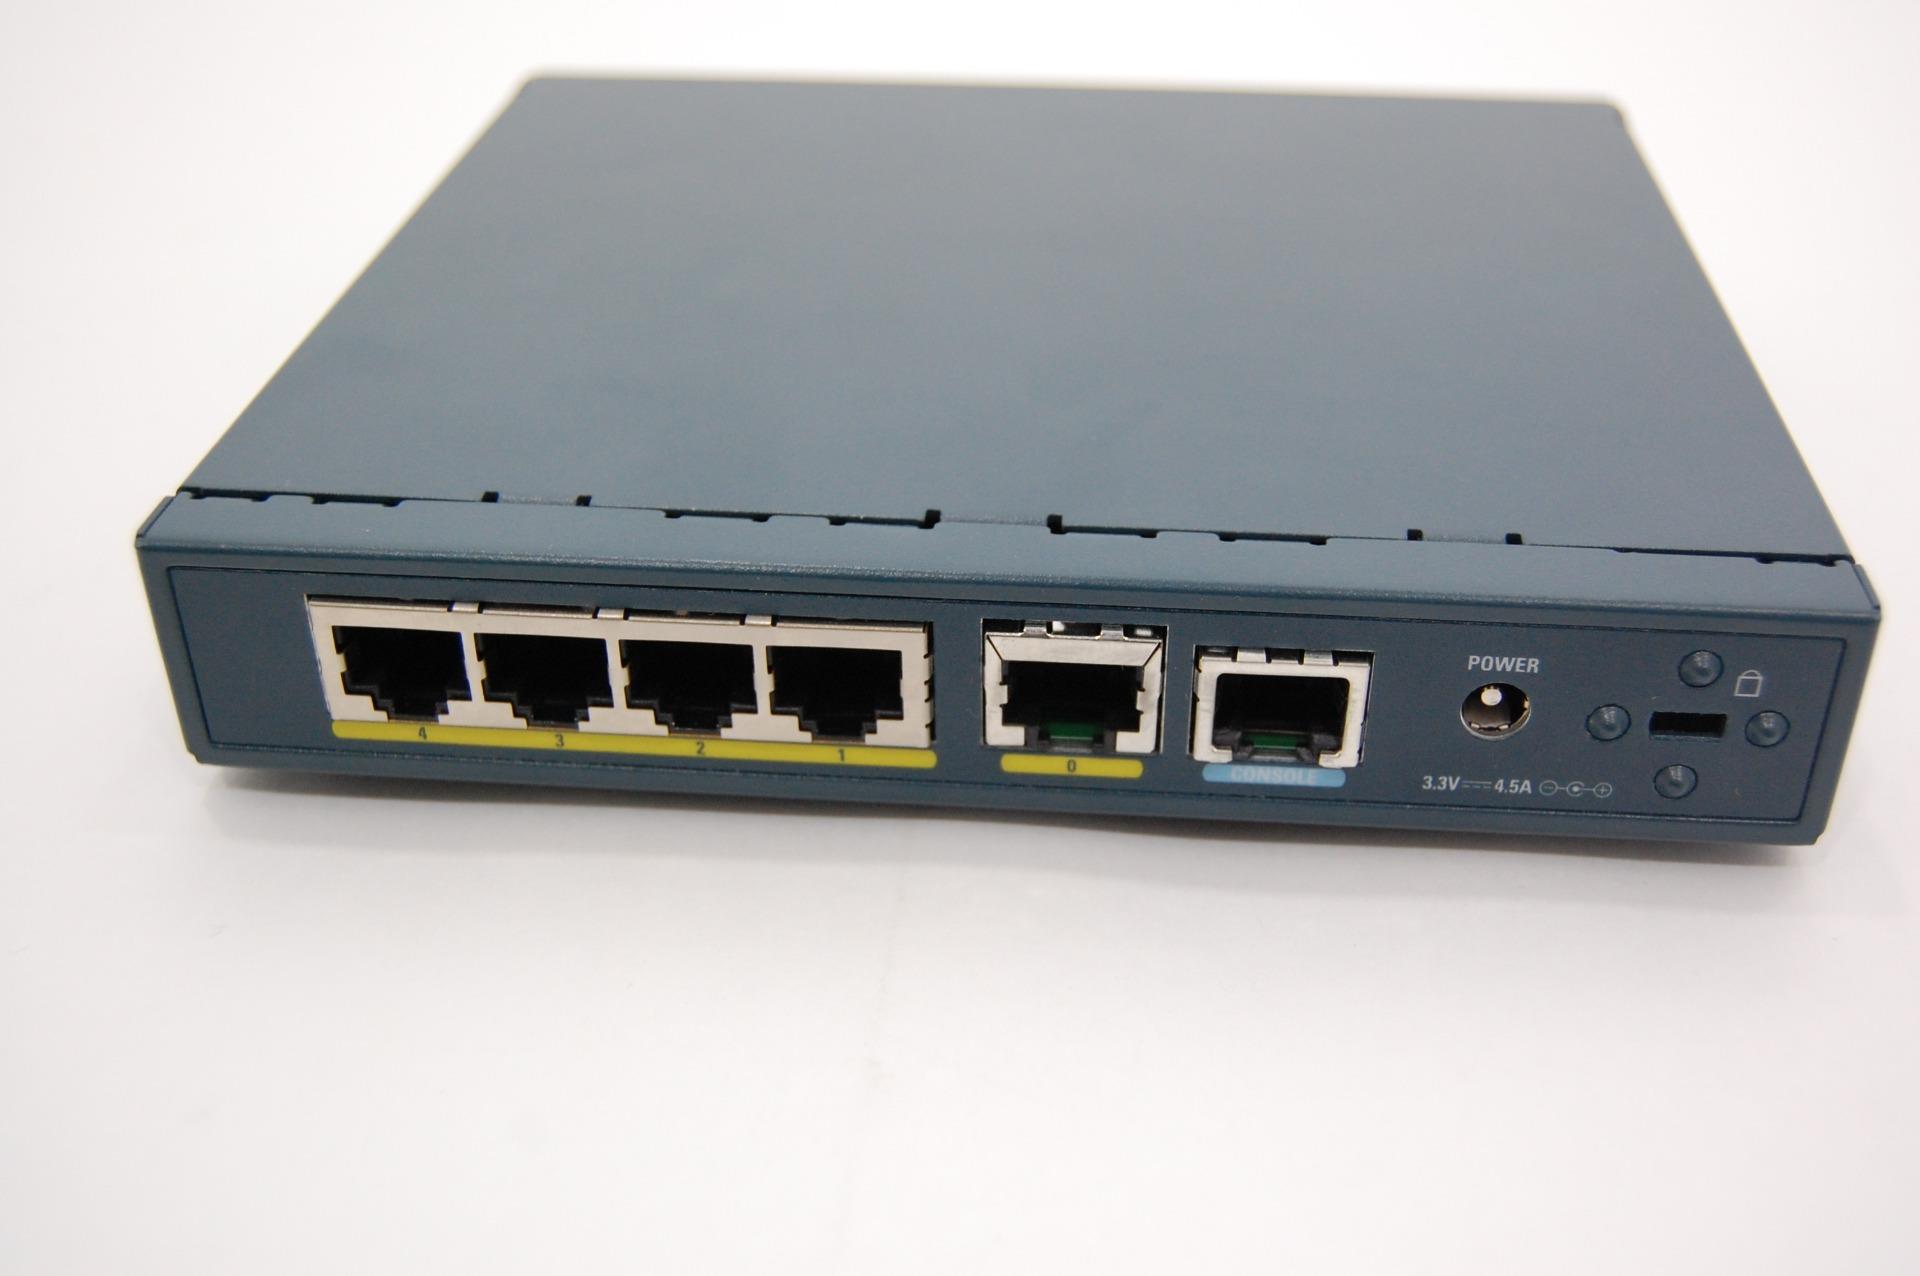 used cisco pix firewall and vpn